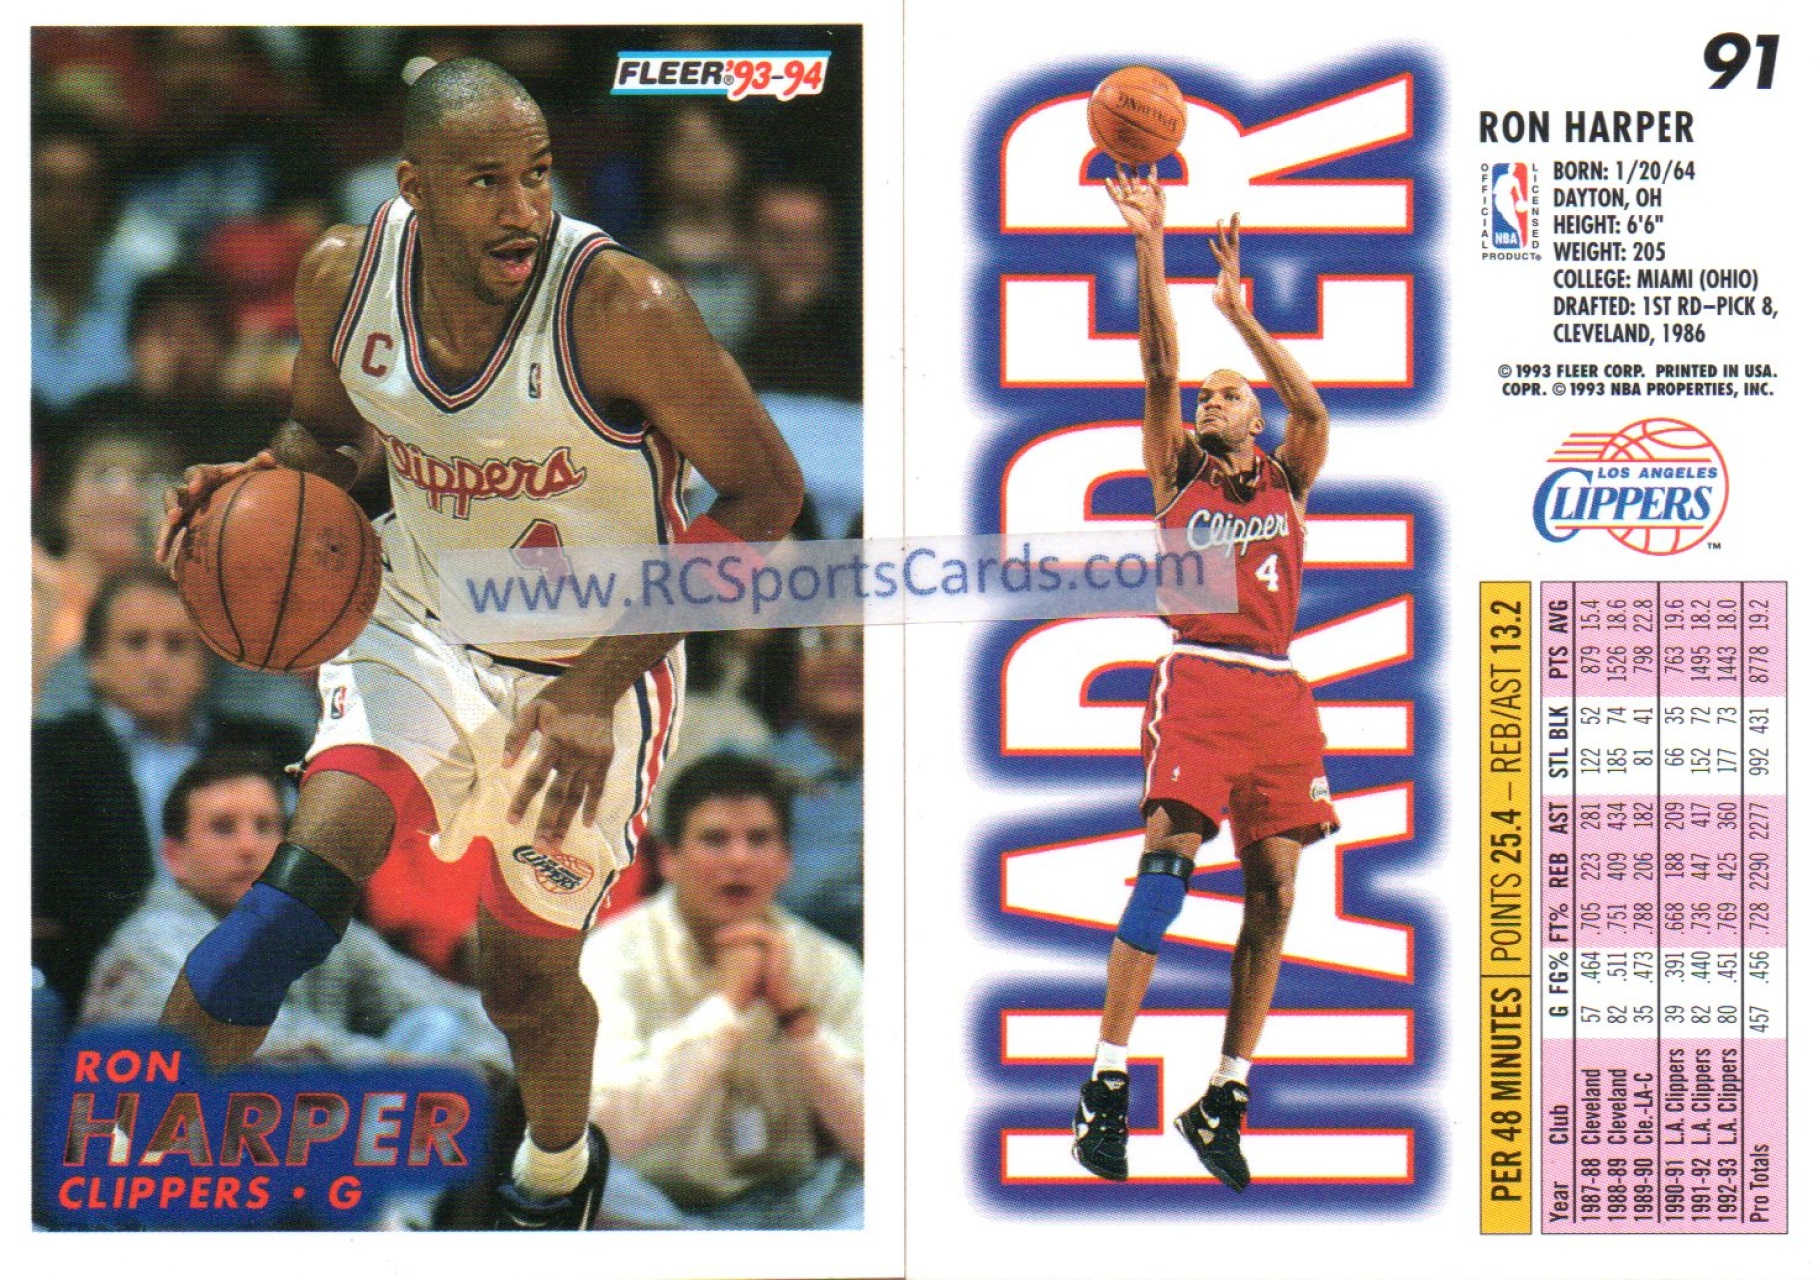 Ron Harper Rush Hour Los Angeles Clippers NBA Basketball Action Poster -  Nike Inc. 1993